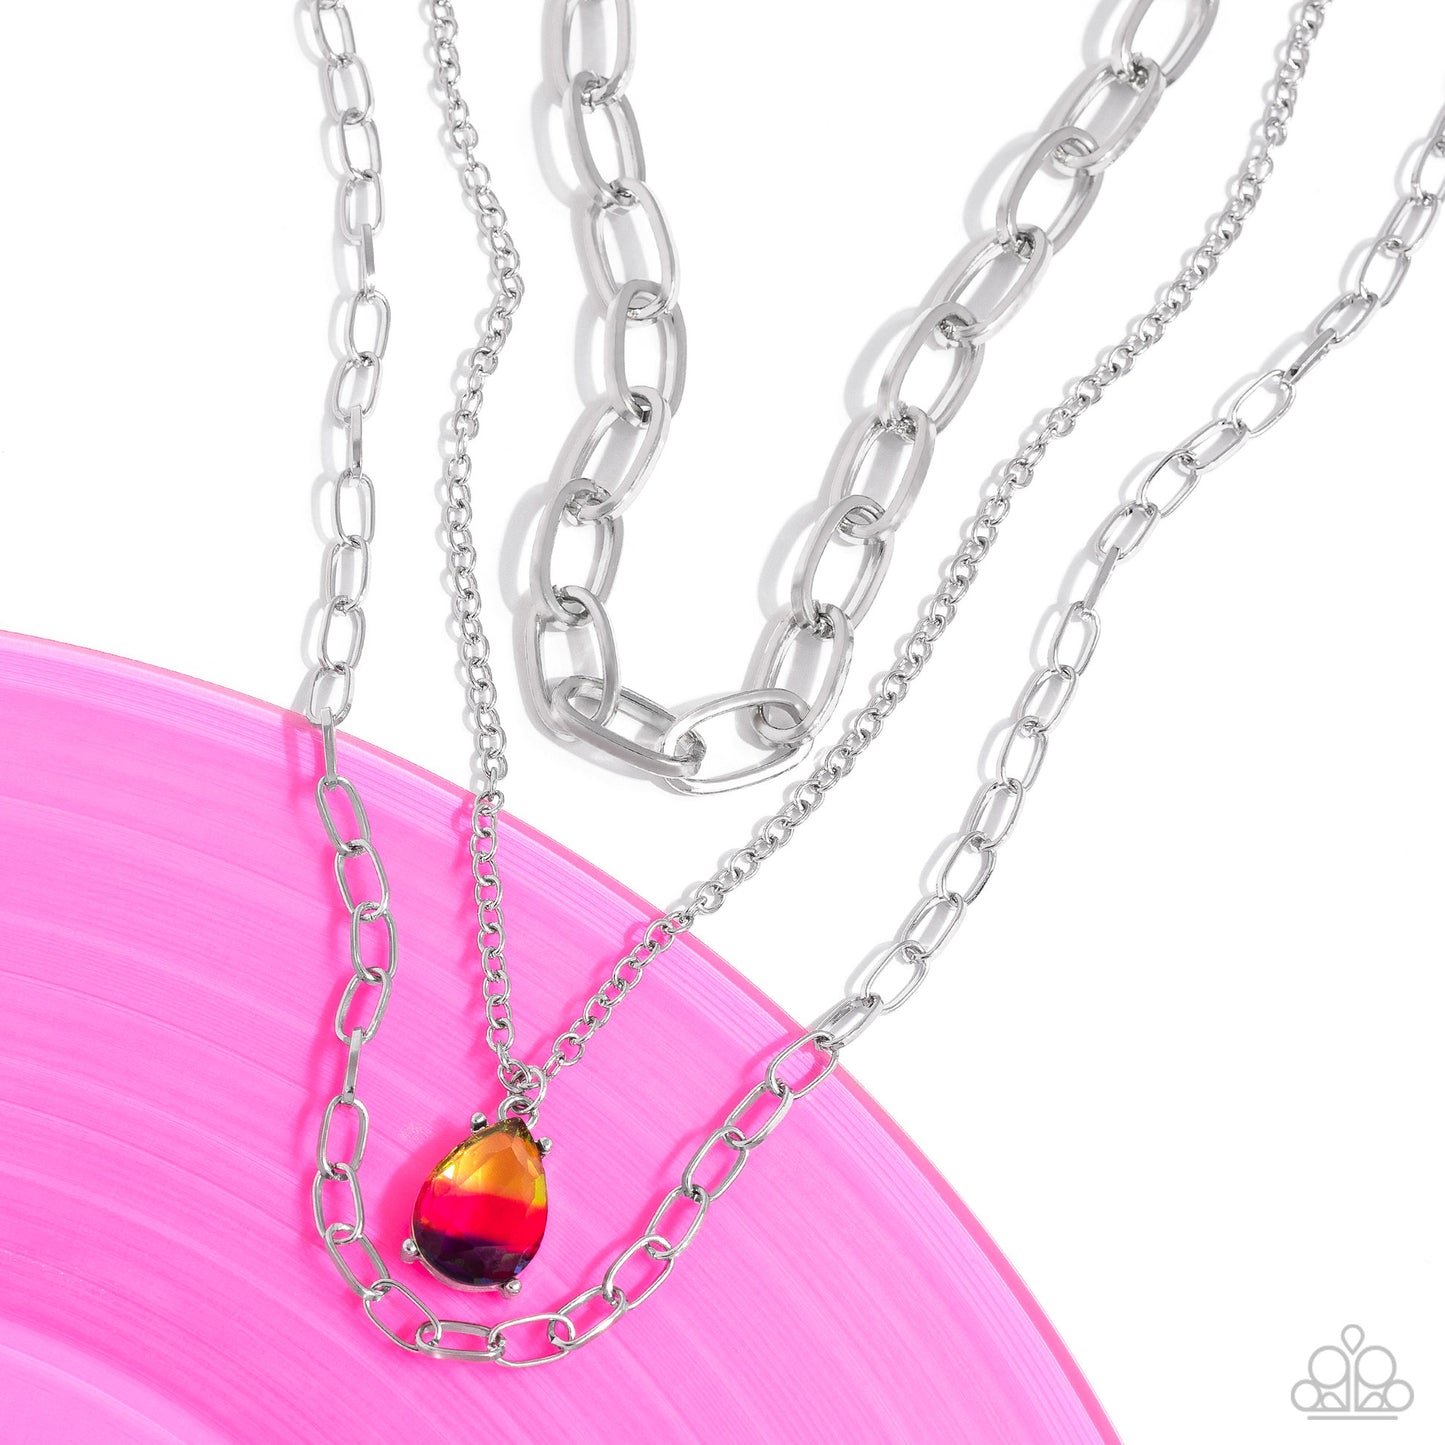 Paparazzi Accessories Teardrop Tiers - Multi A trio of mismatched silver chains coalesces down the neckline for a monochromatic masterpiece. Strung on the middle chain, a pronged glassy teardrop with an ombré effect of yellow to pink to purple stands out